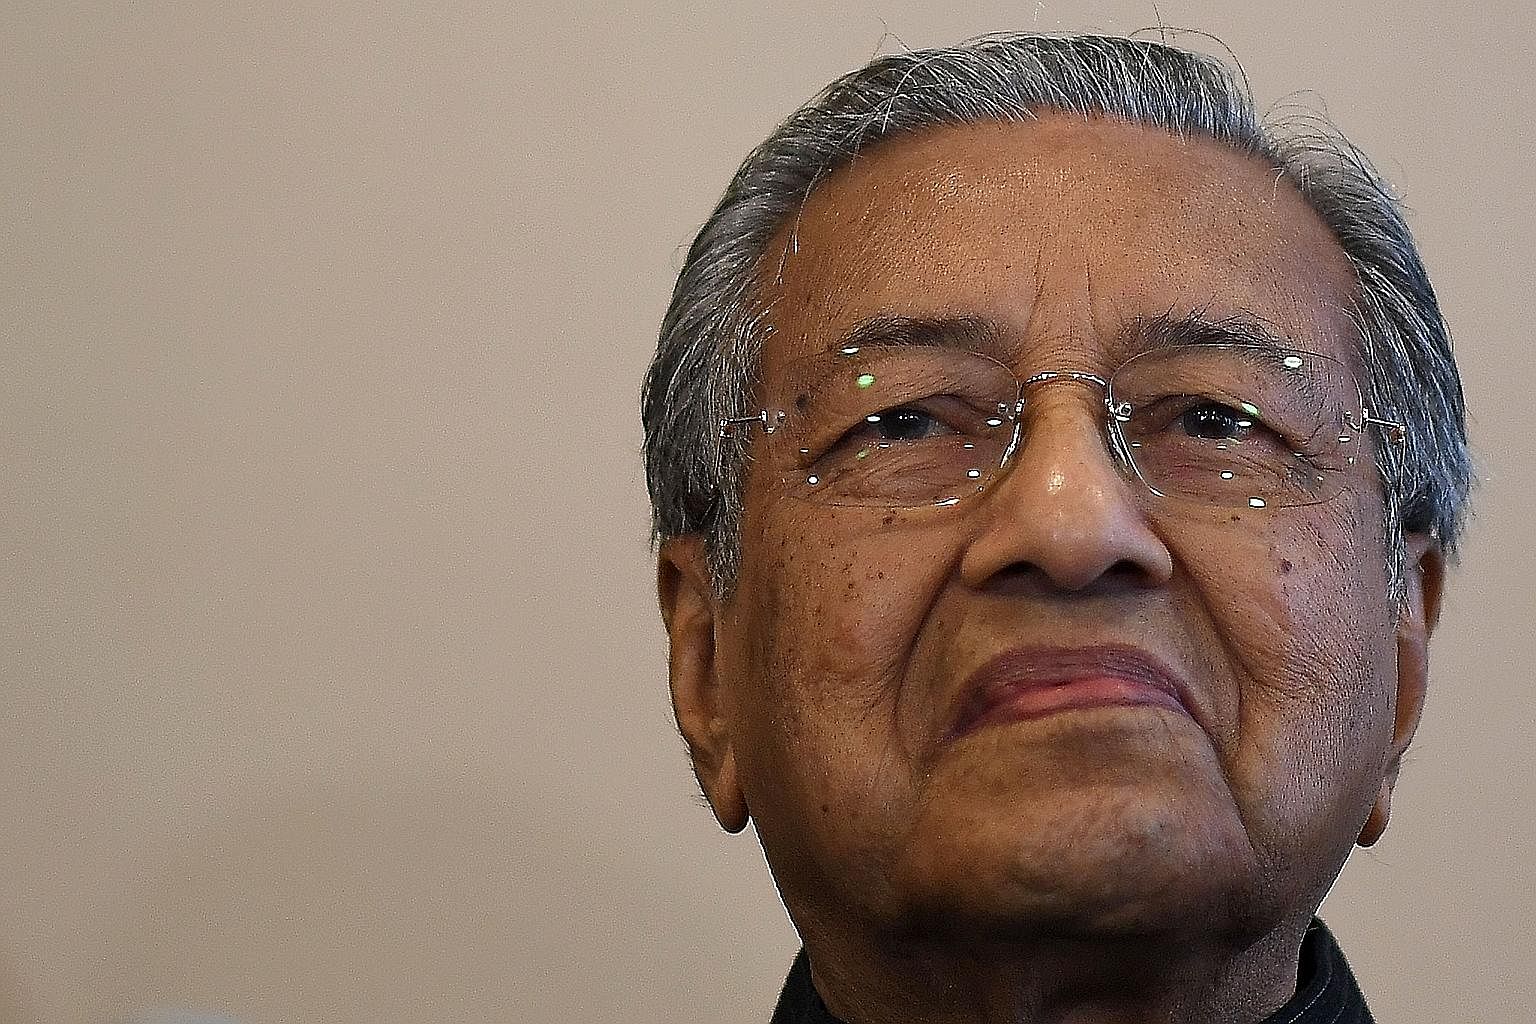 Pakatan Harapan's appointment of Dr Mahathir Mohamad as its chairman was the opposition's response to Umno's ethnic scaremongering.